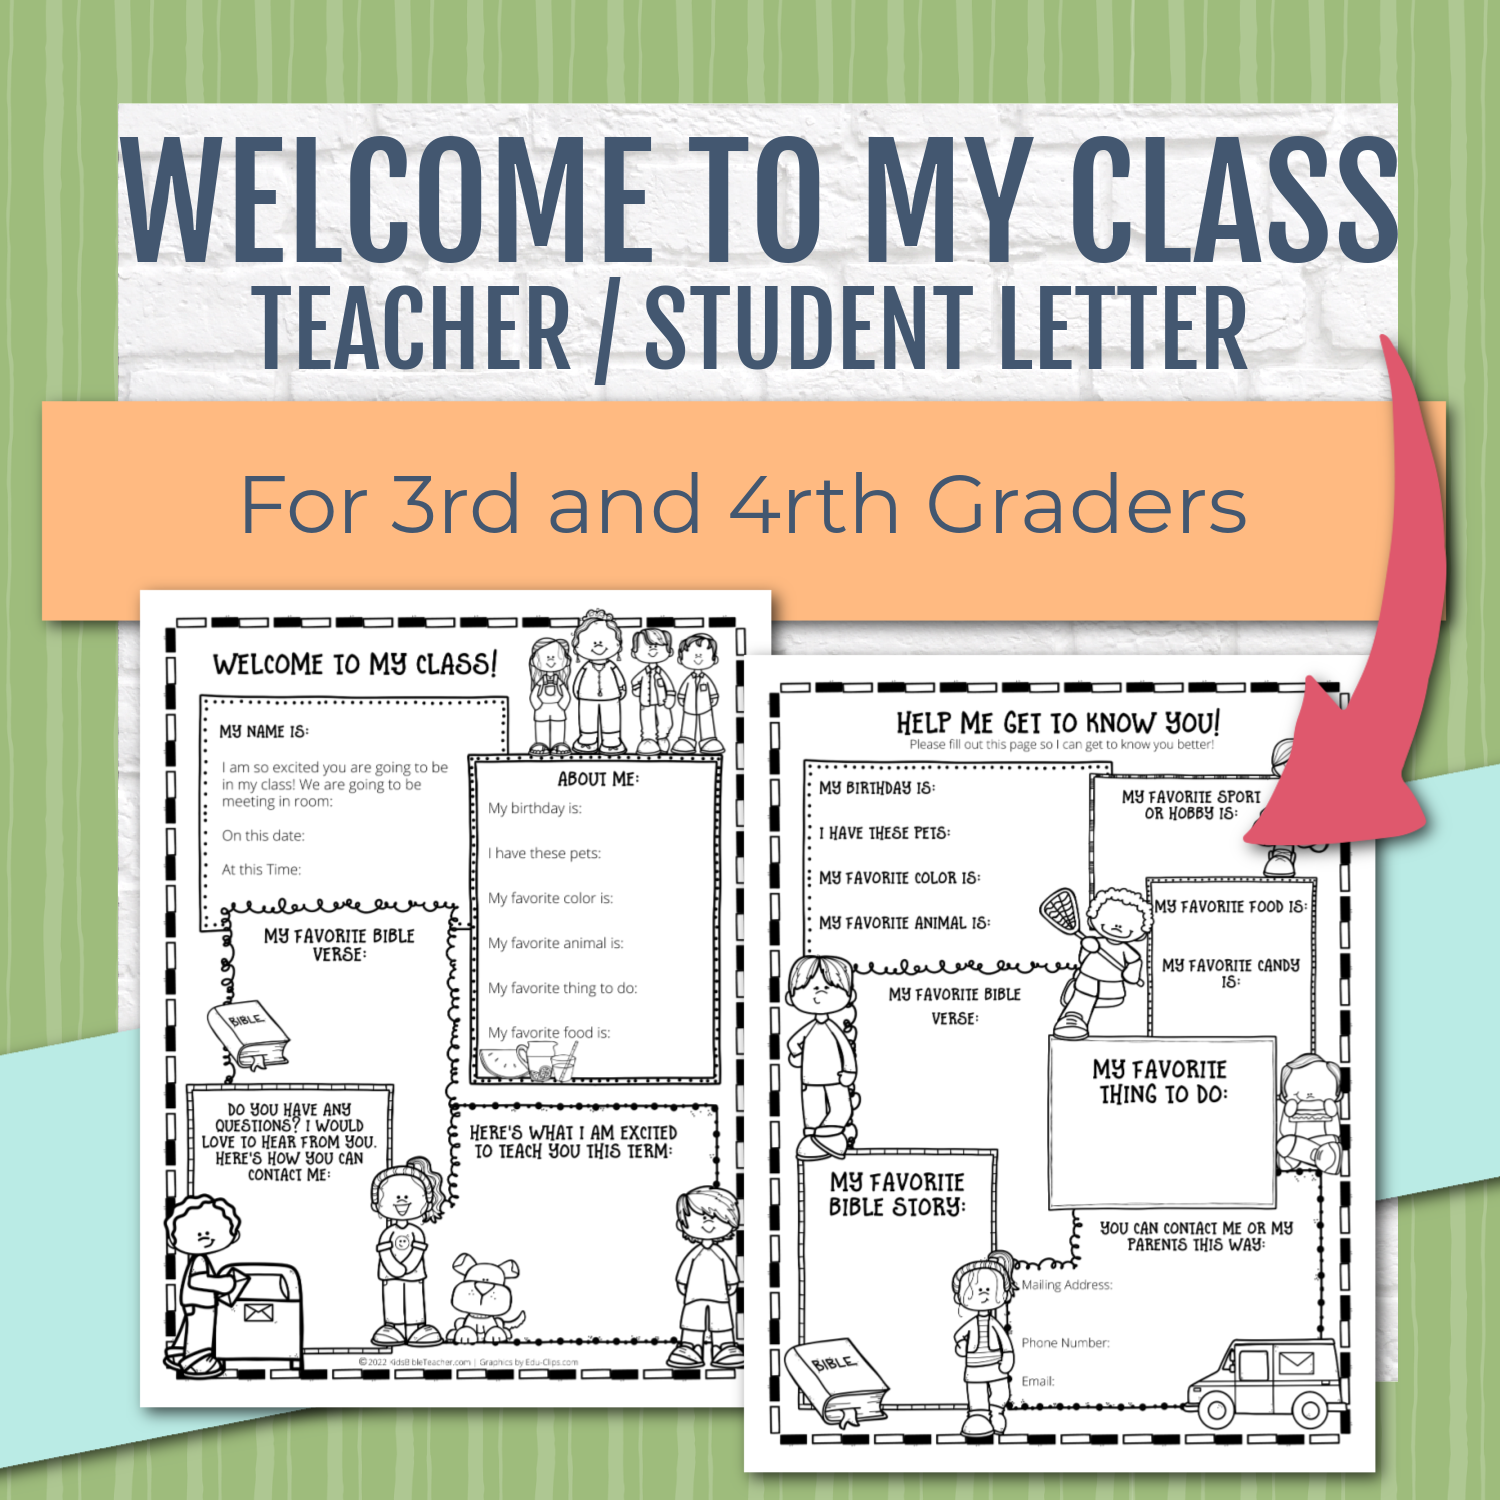 Welcome to My Class Letter for Third Graders and Fourth Graders